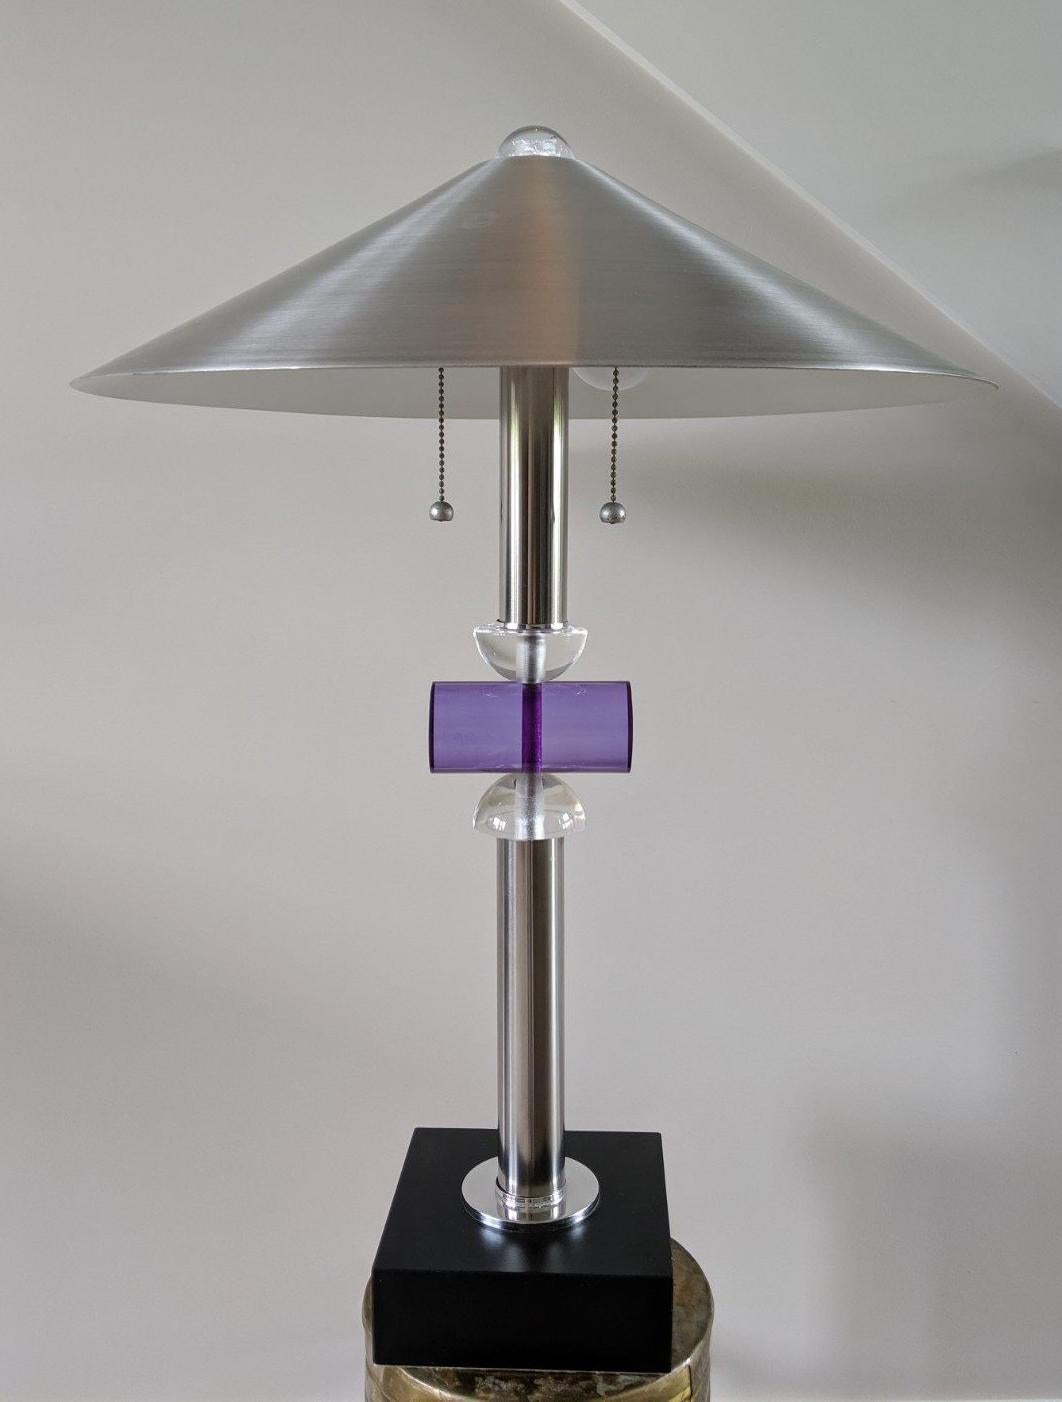 Fabulous Postmodern table or desk lamp with spun aluminum shade, chrome stem on black square base. Centre of stem is adorned with clear and purple acrylic elements and acrylic finial. Two bulb heads with pull chains.